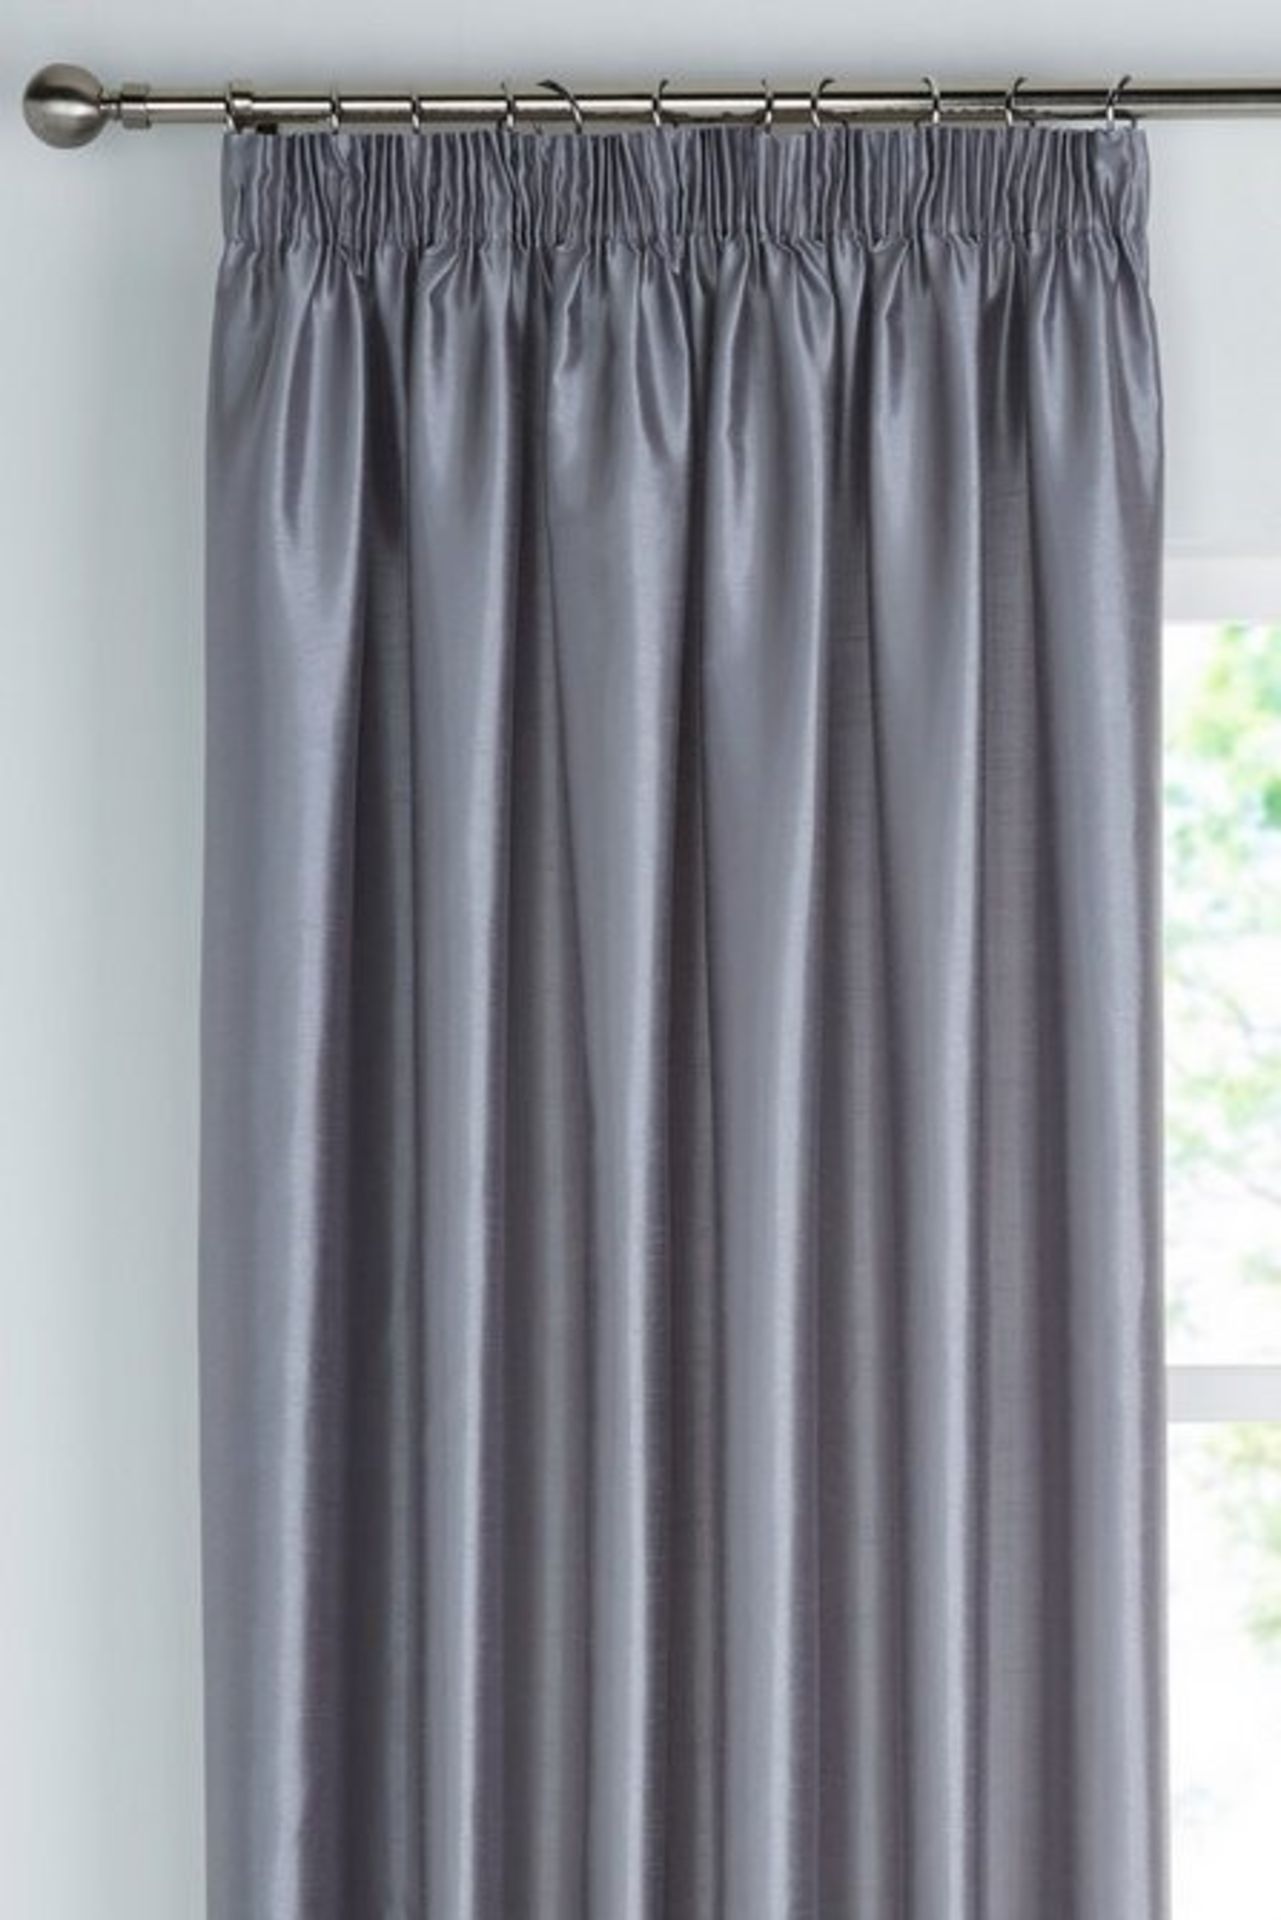 1 BAGGED PAIR OF FAUX SILK LINED PENCIL PLEAT CURTAINS IN SILVER / SIZE: 90 X 90 / RRP £60.00 (